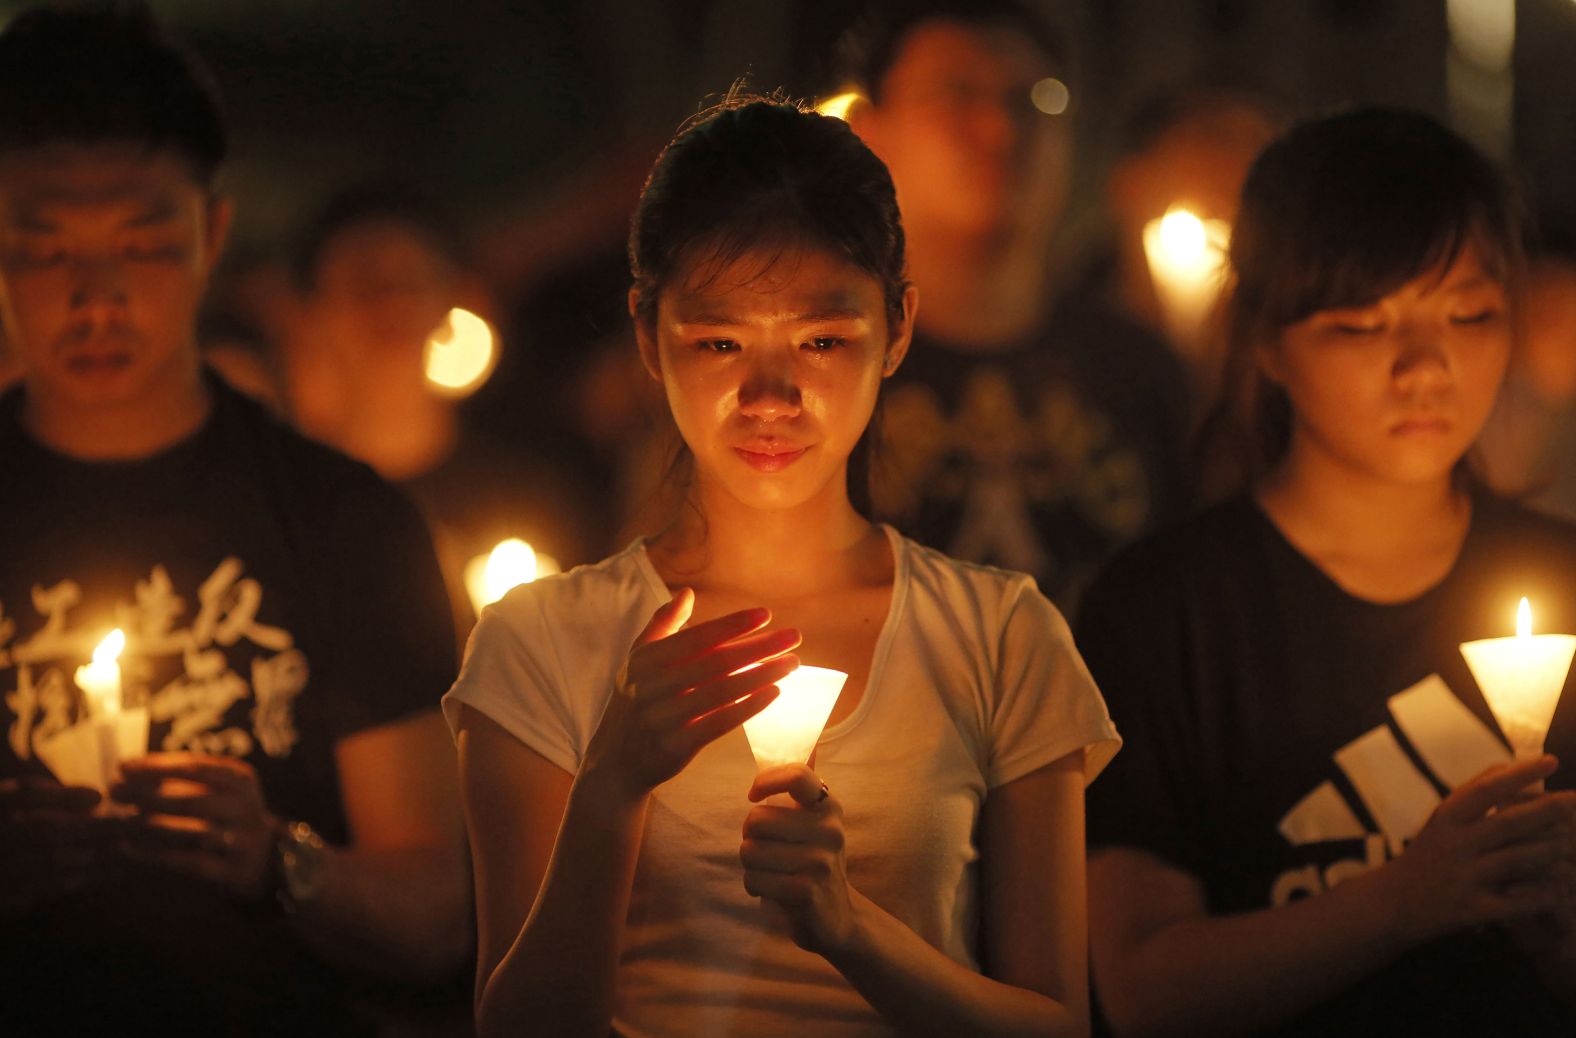 People attend a candlelight vigil at Victoria Park in Hong Kong in 2015, in remembrance of victims of the 1989 Tiananmen Square massacre.